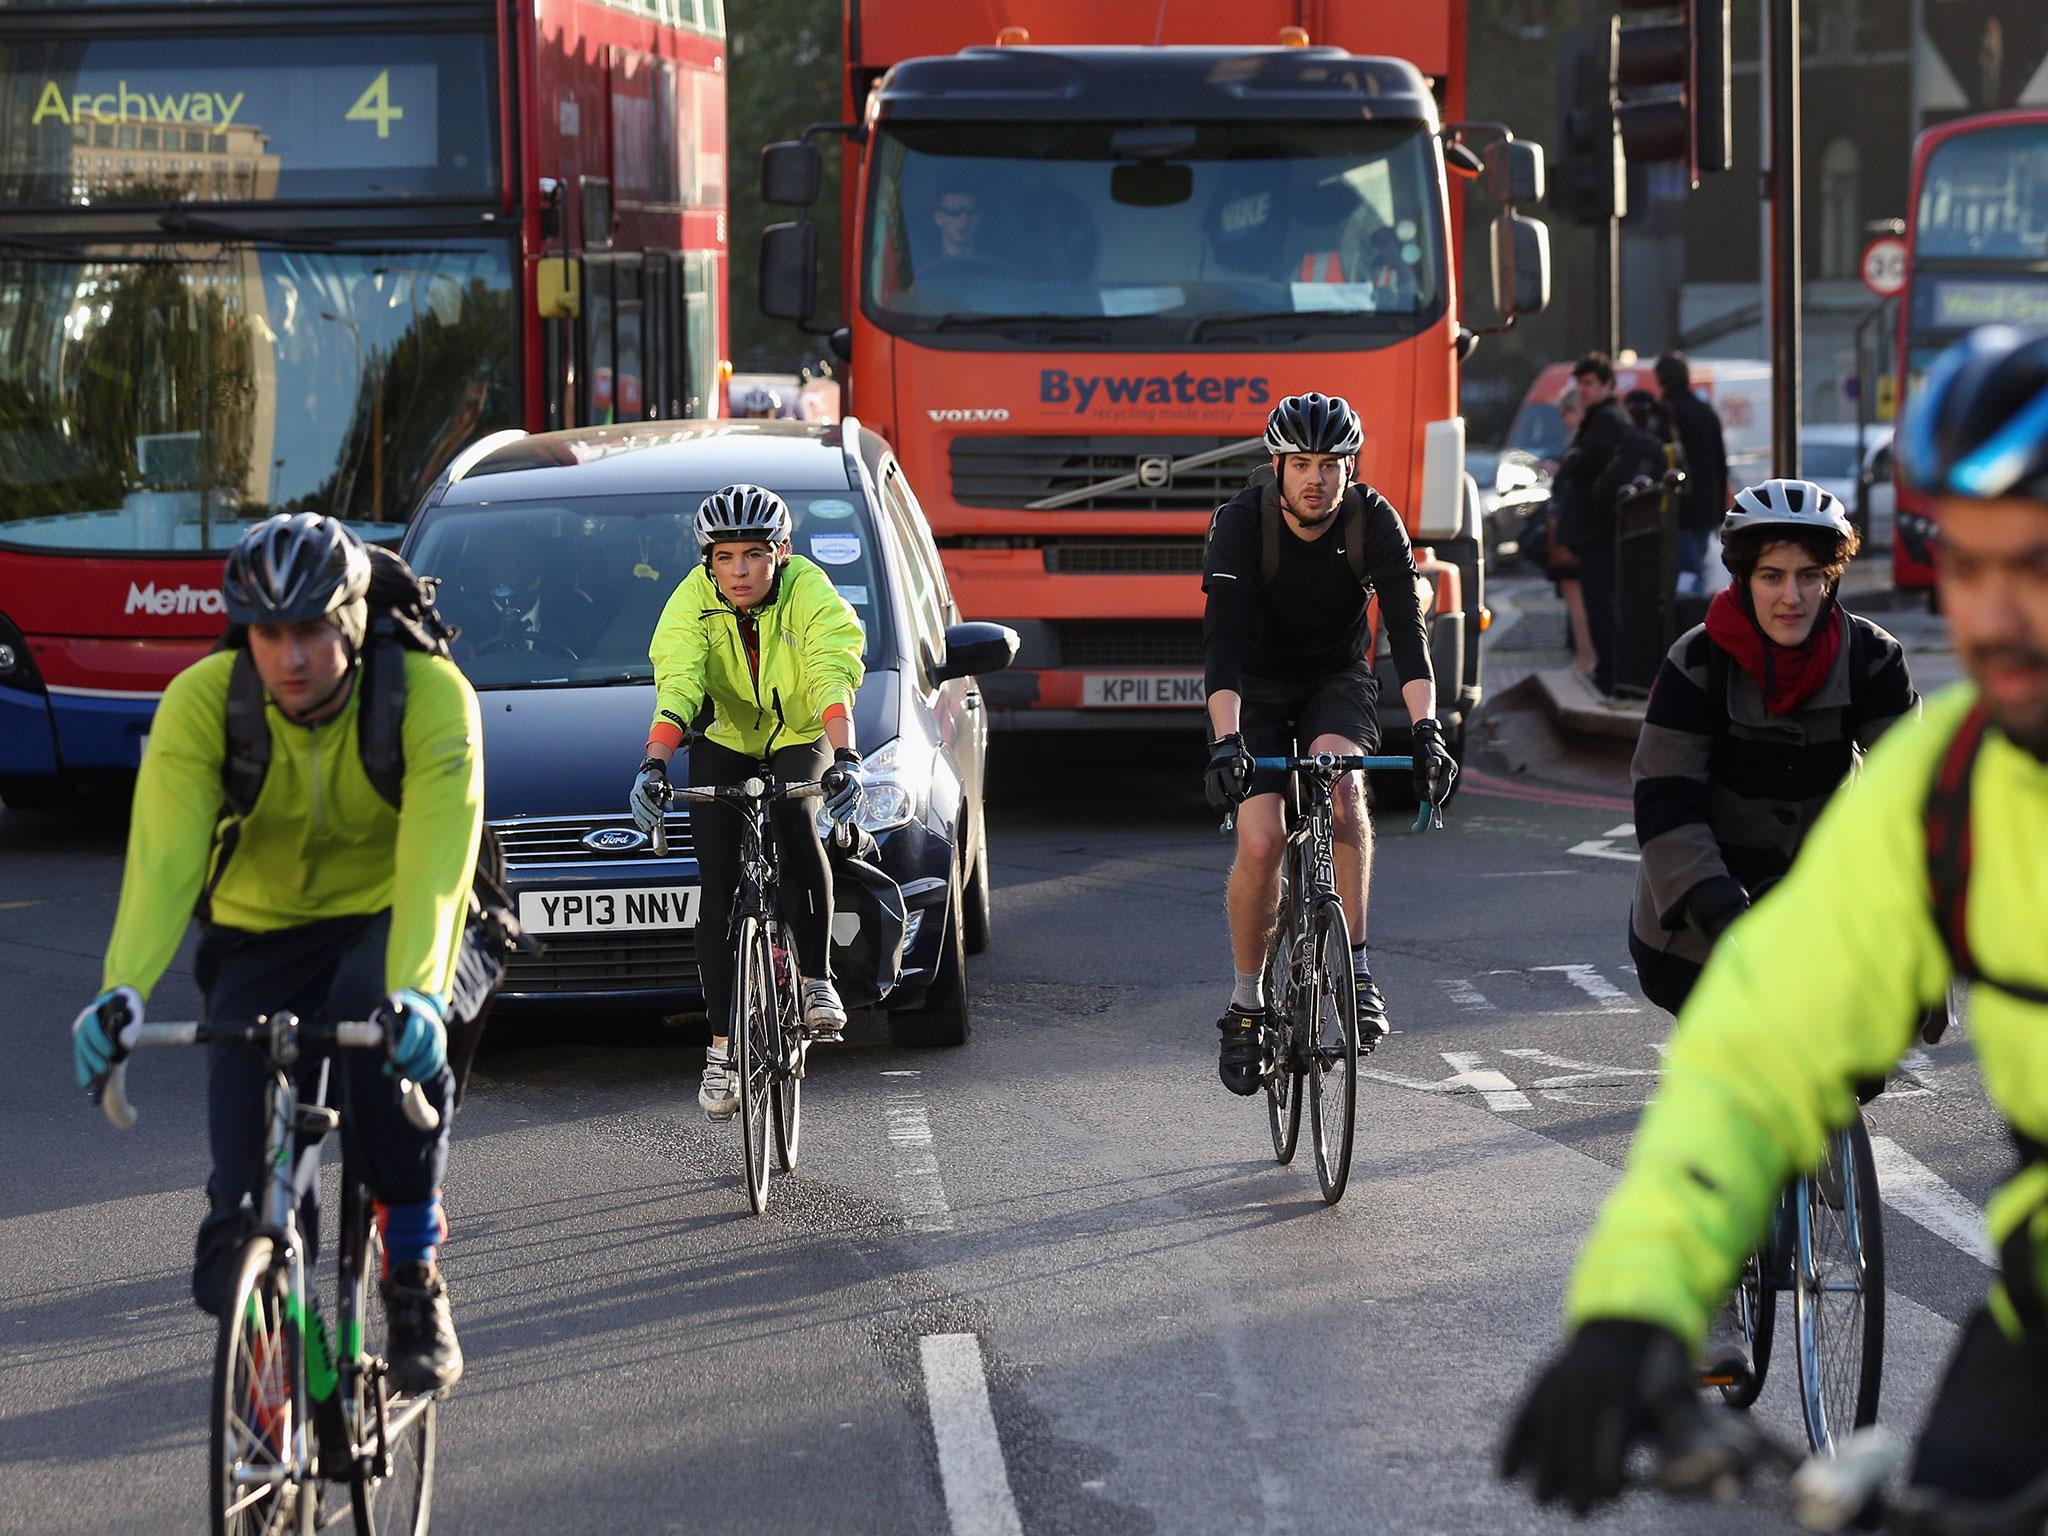 Kingston council is attempting to ease pressure on its roads by promoting cycling